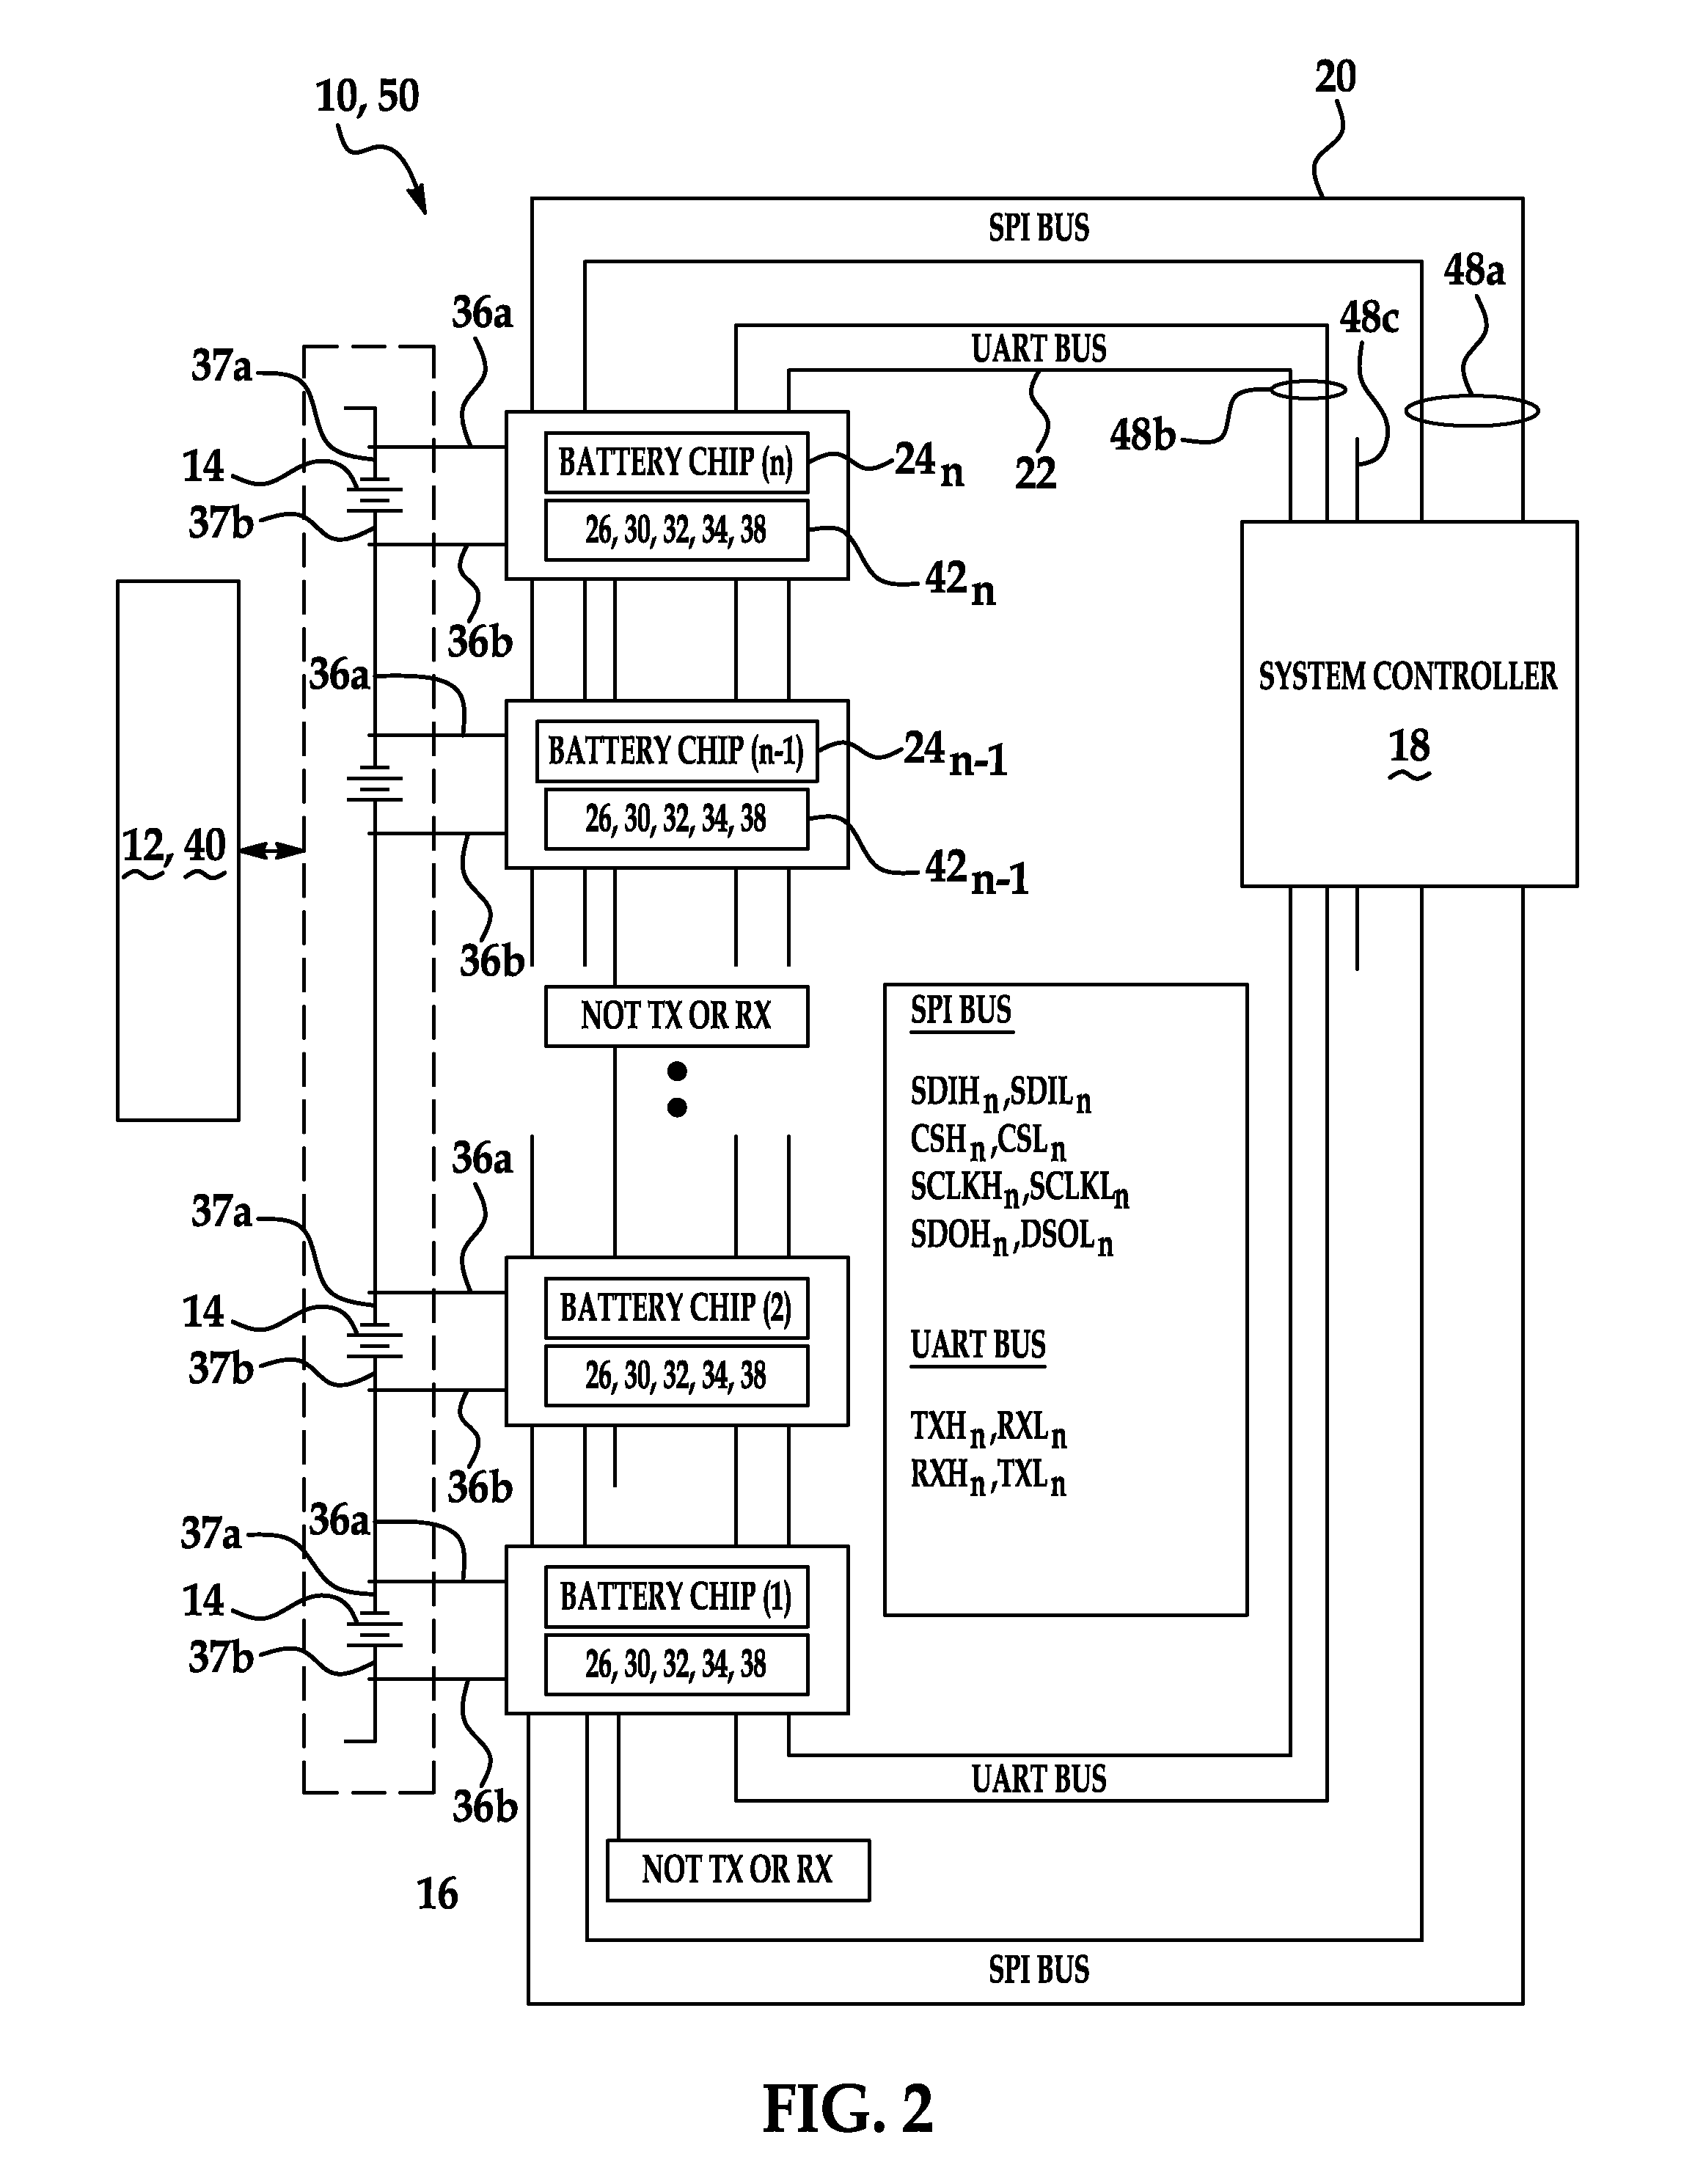 Battery monitoring and control system and method of use